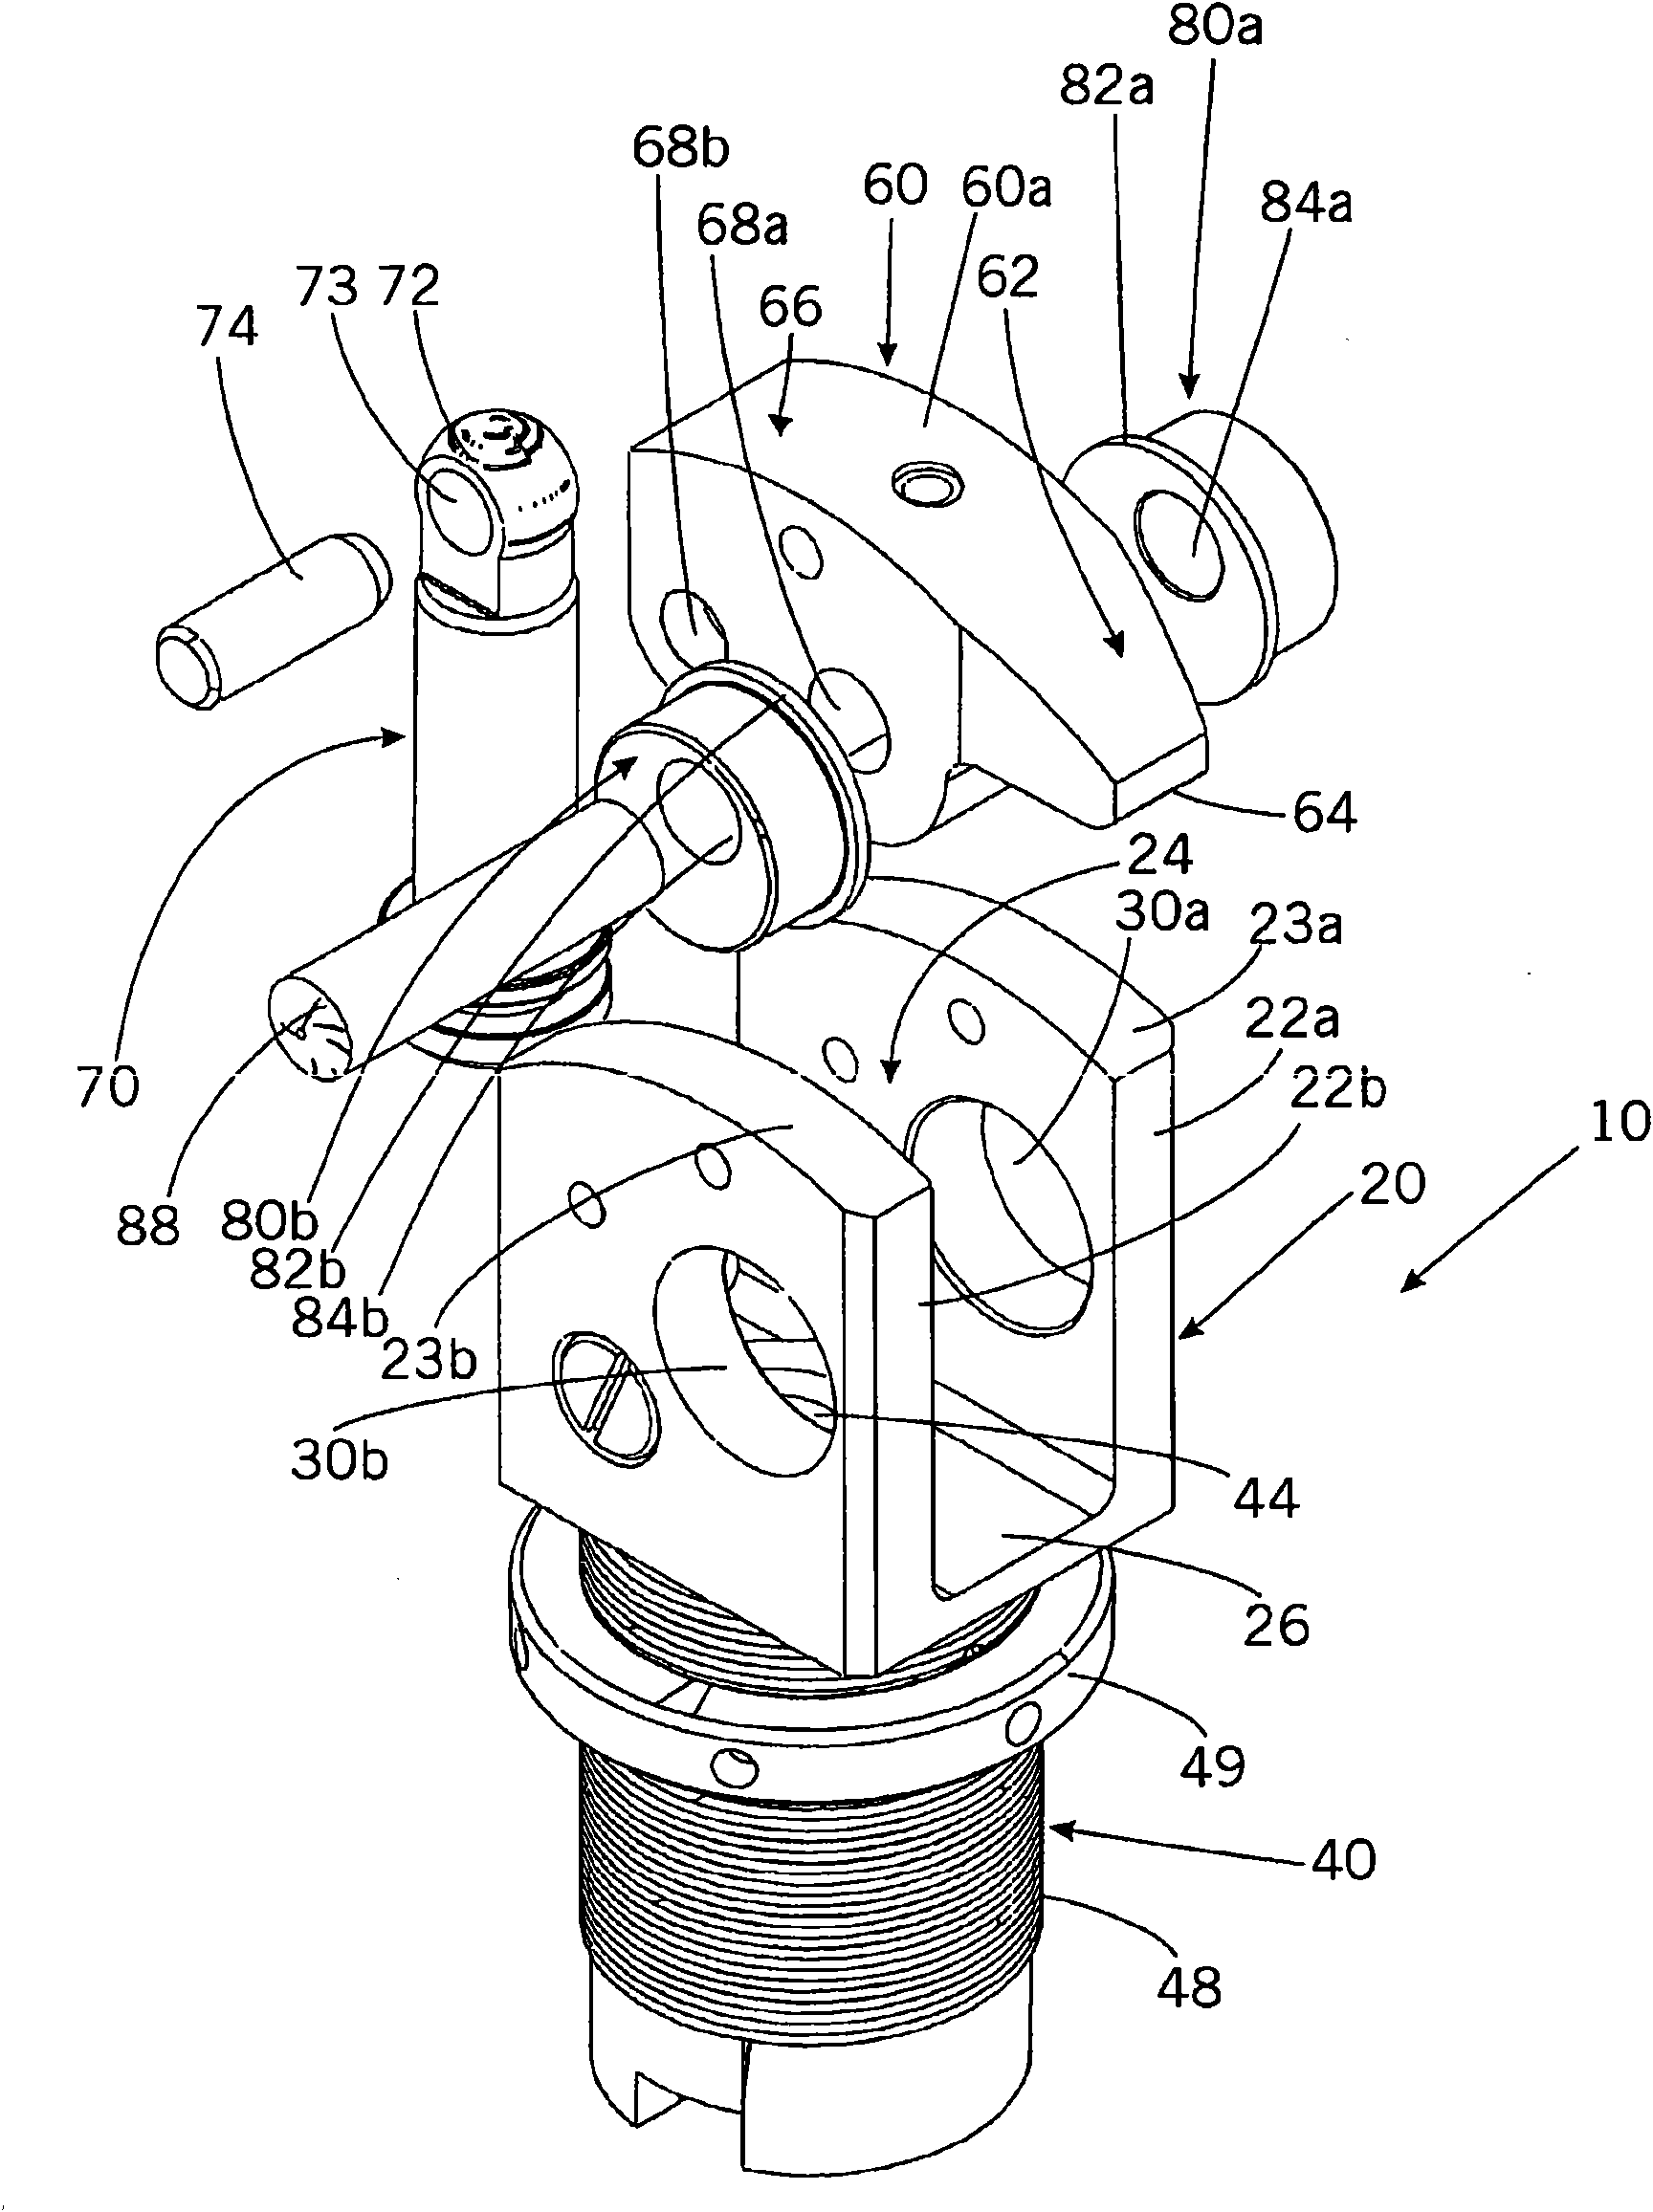 Clamping element